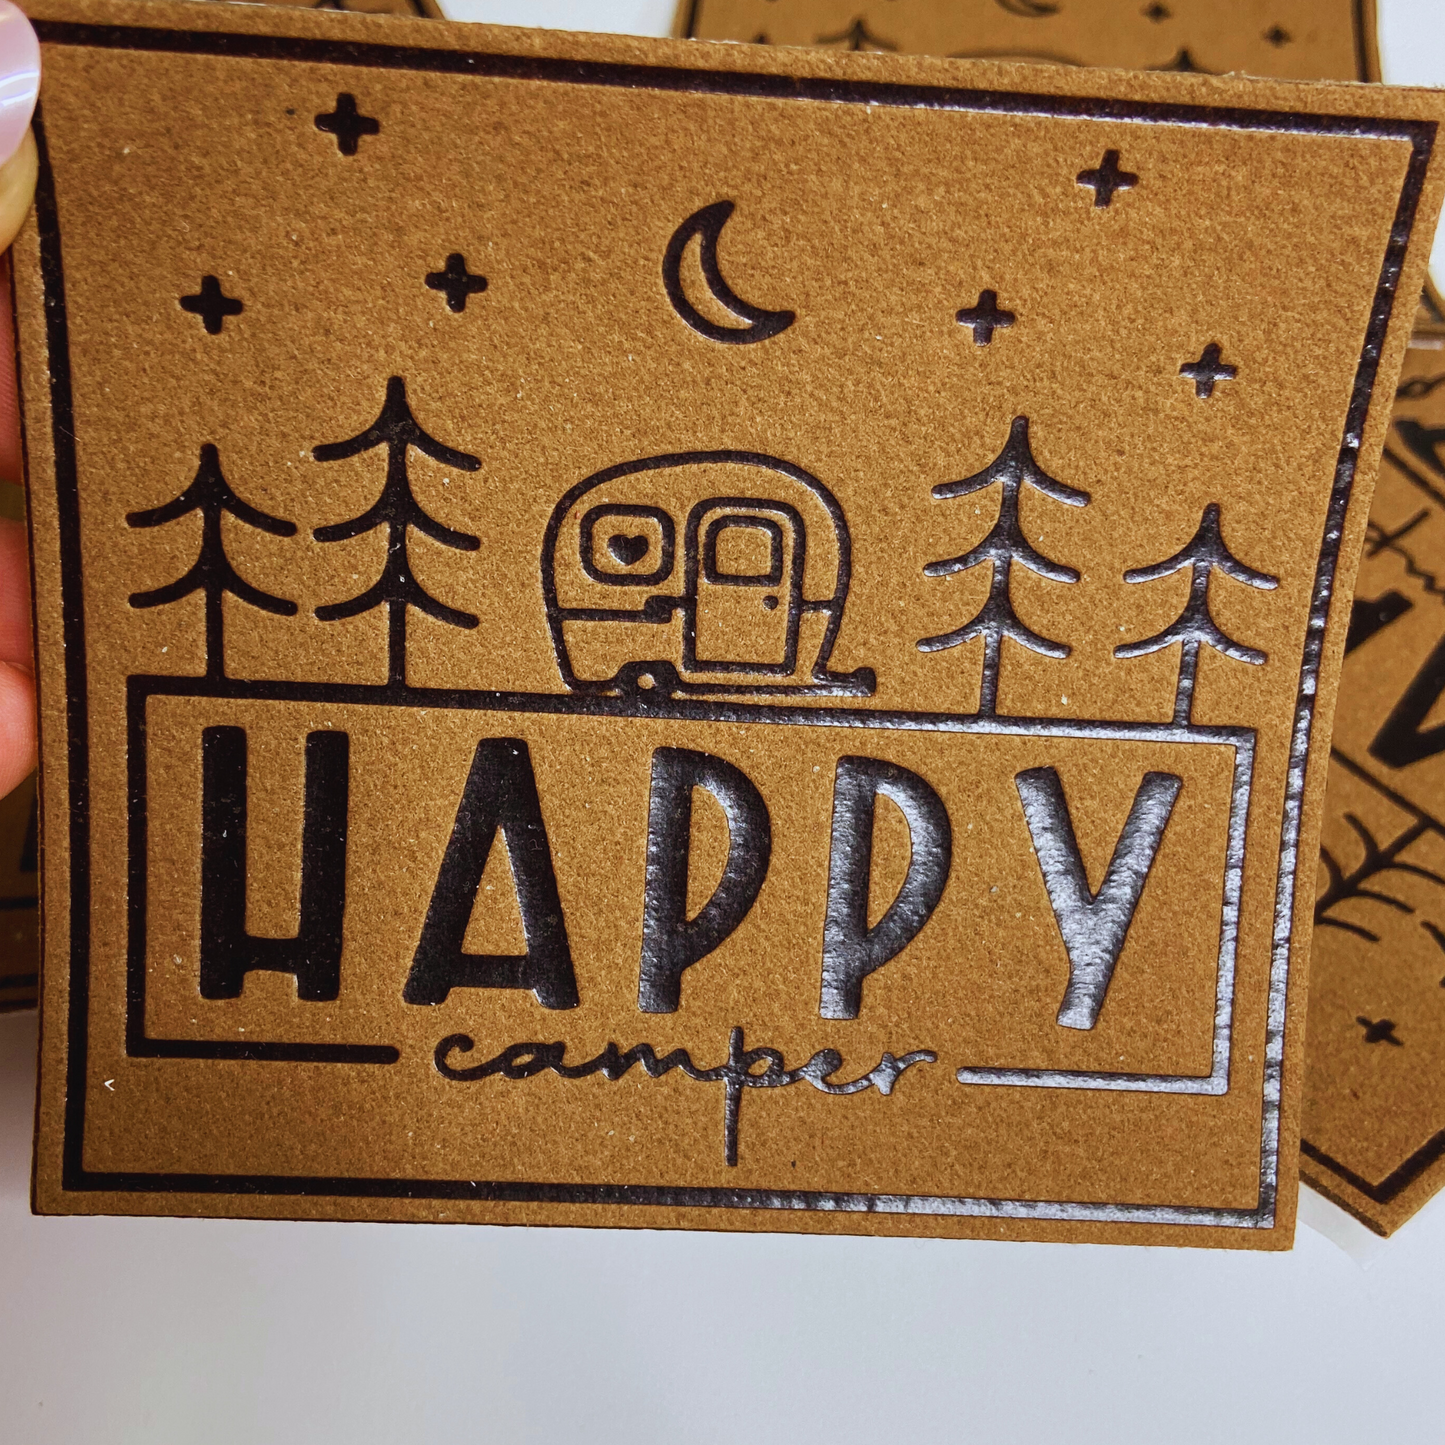 4" x 3.5" HAPPY Camper Patch - Hat Patch in Brown